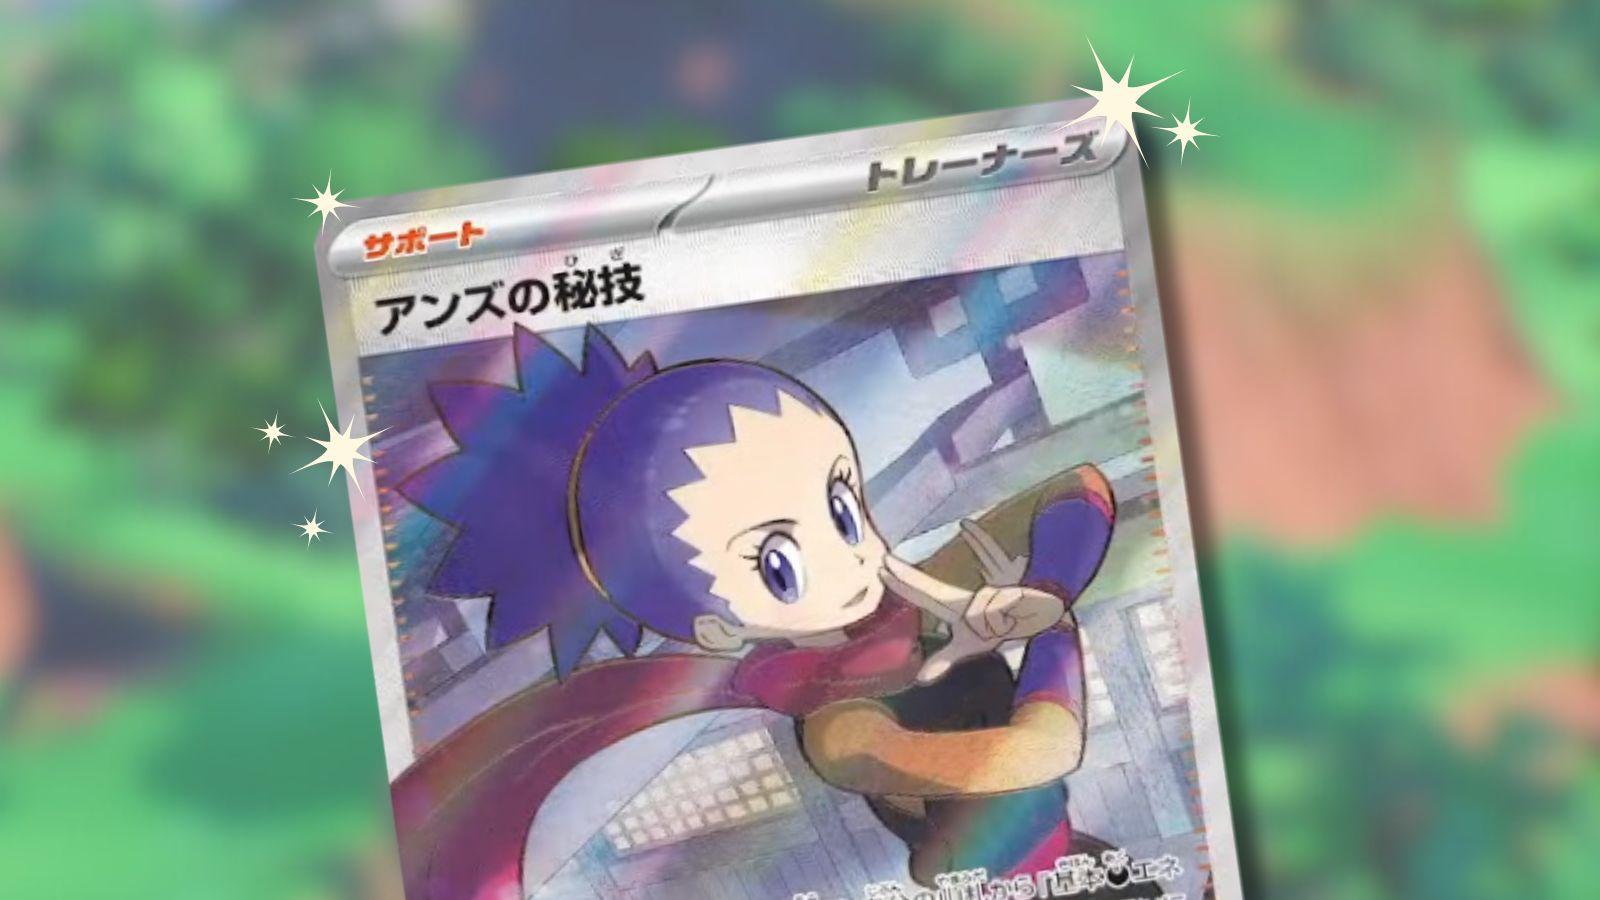 Janine full art Pokemon card with game background.